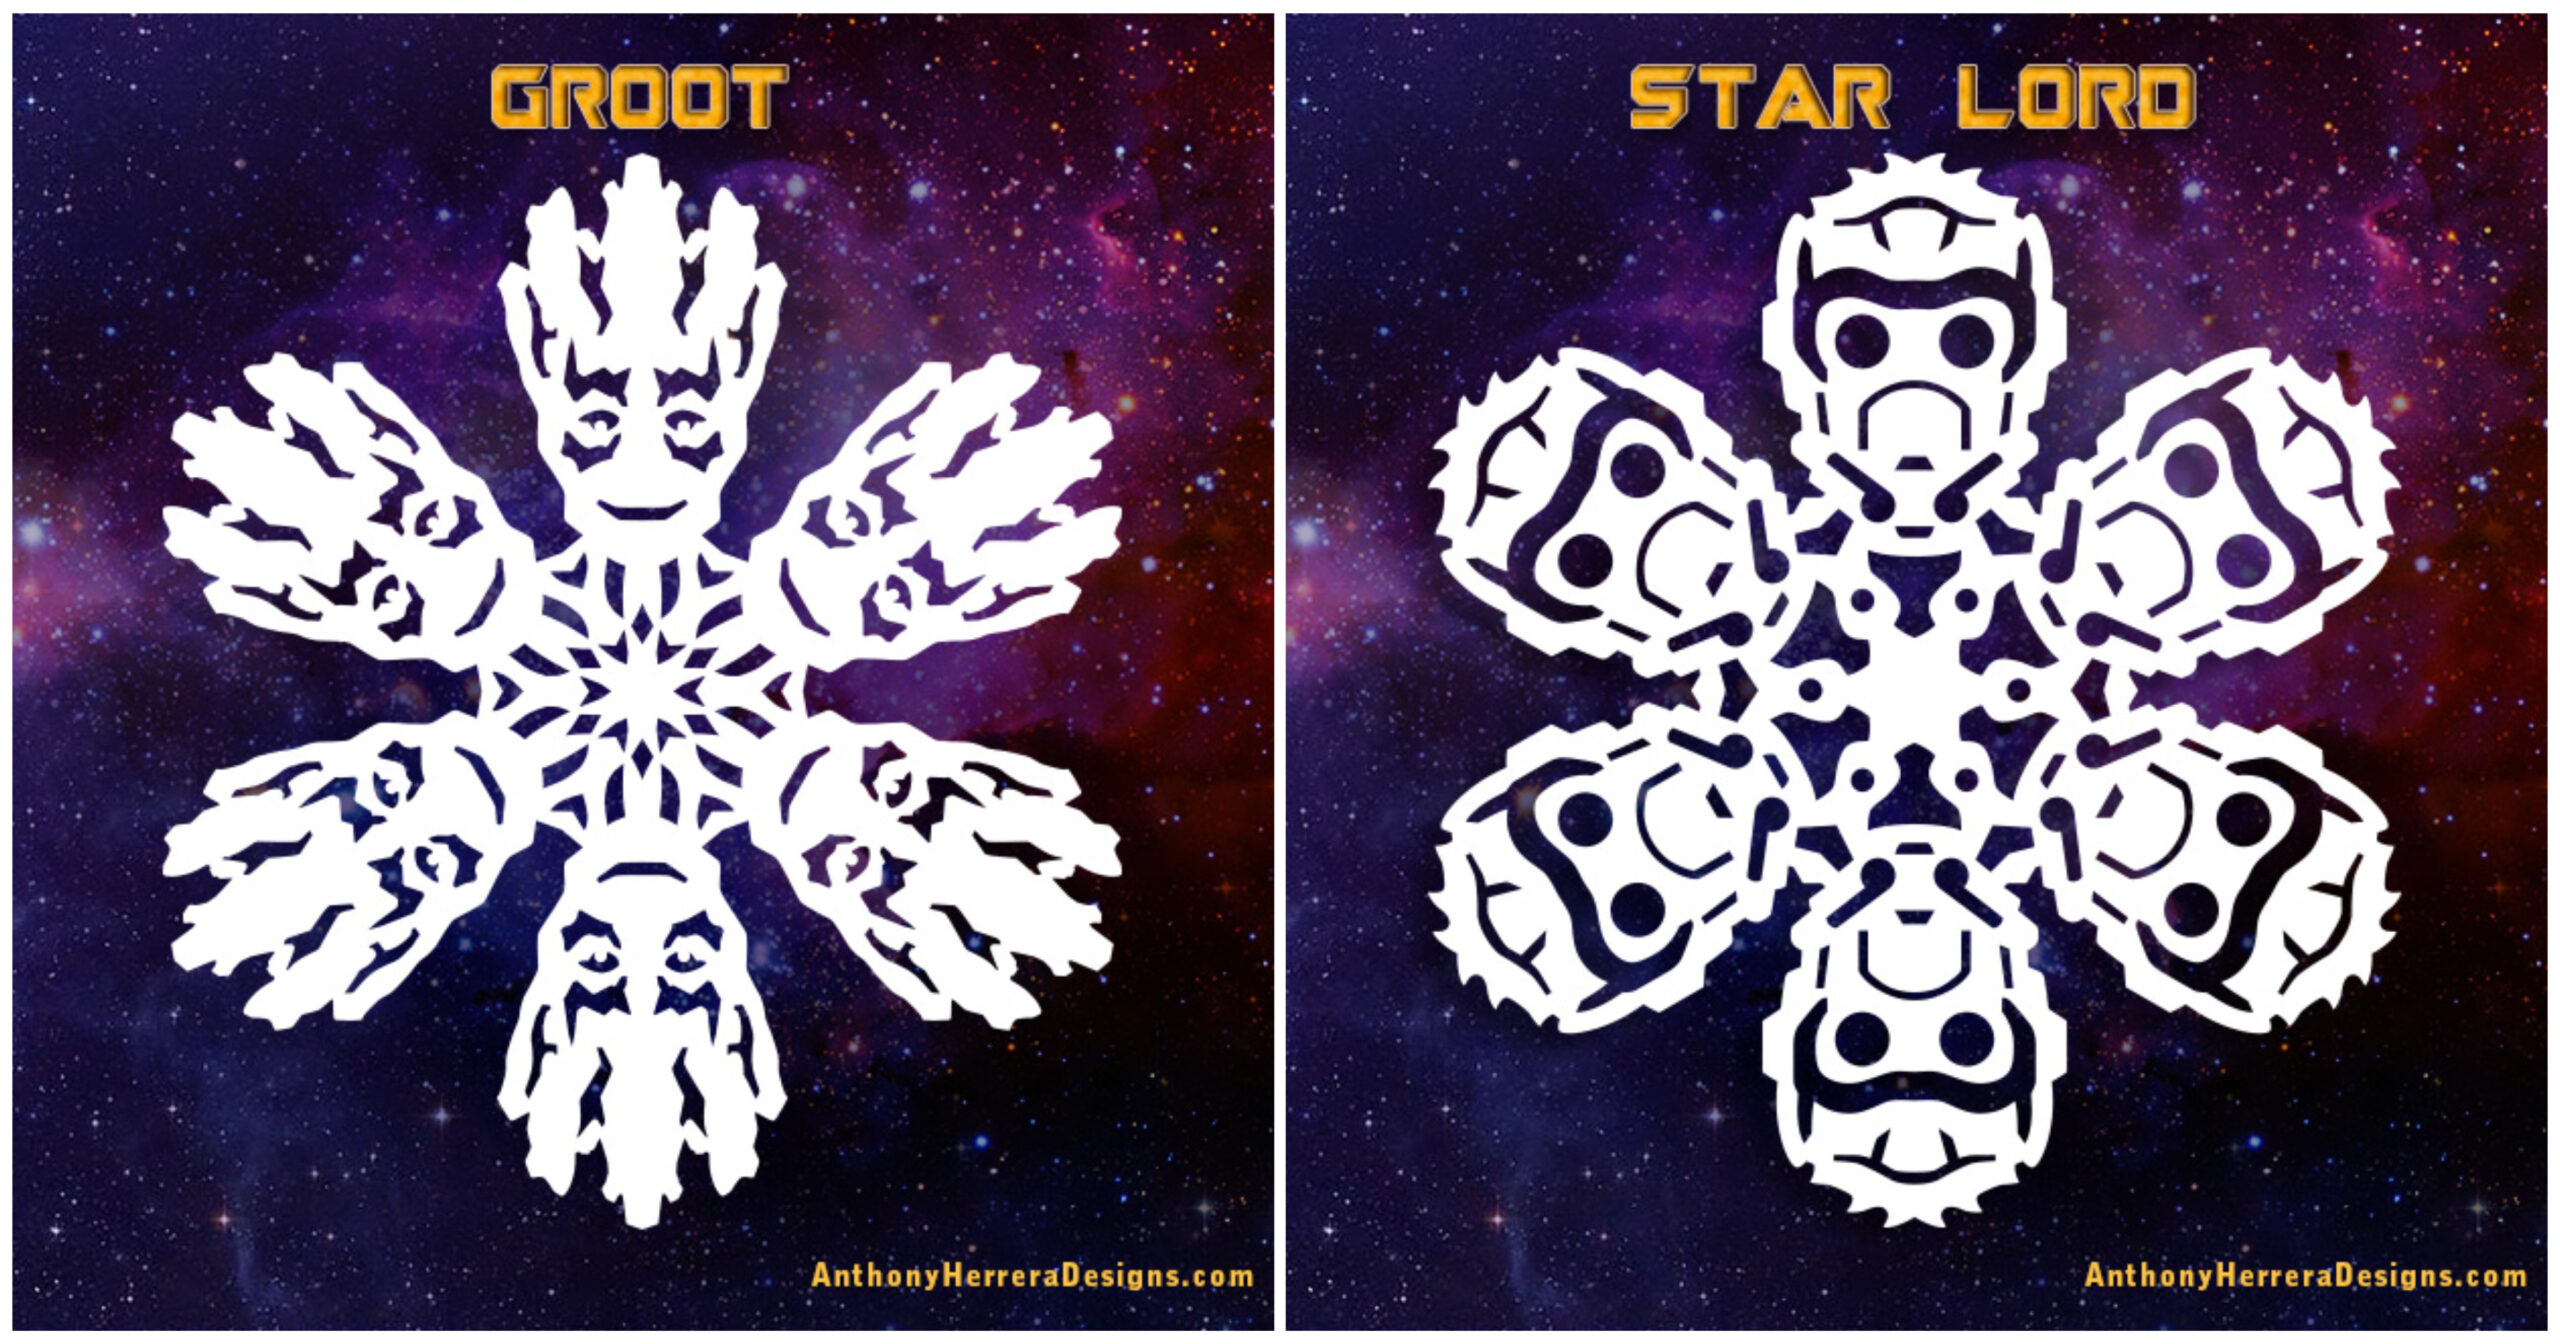 Make your own Guardians of the Galaxy Paper Snowflakes chipandco.com